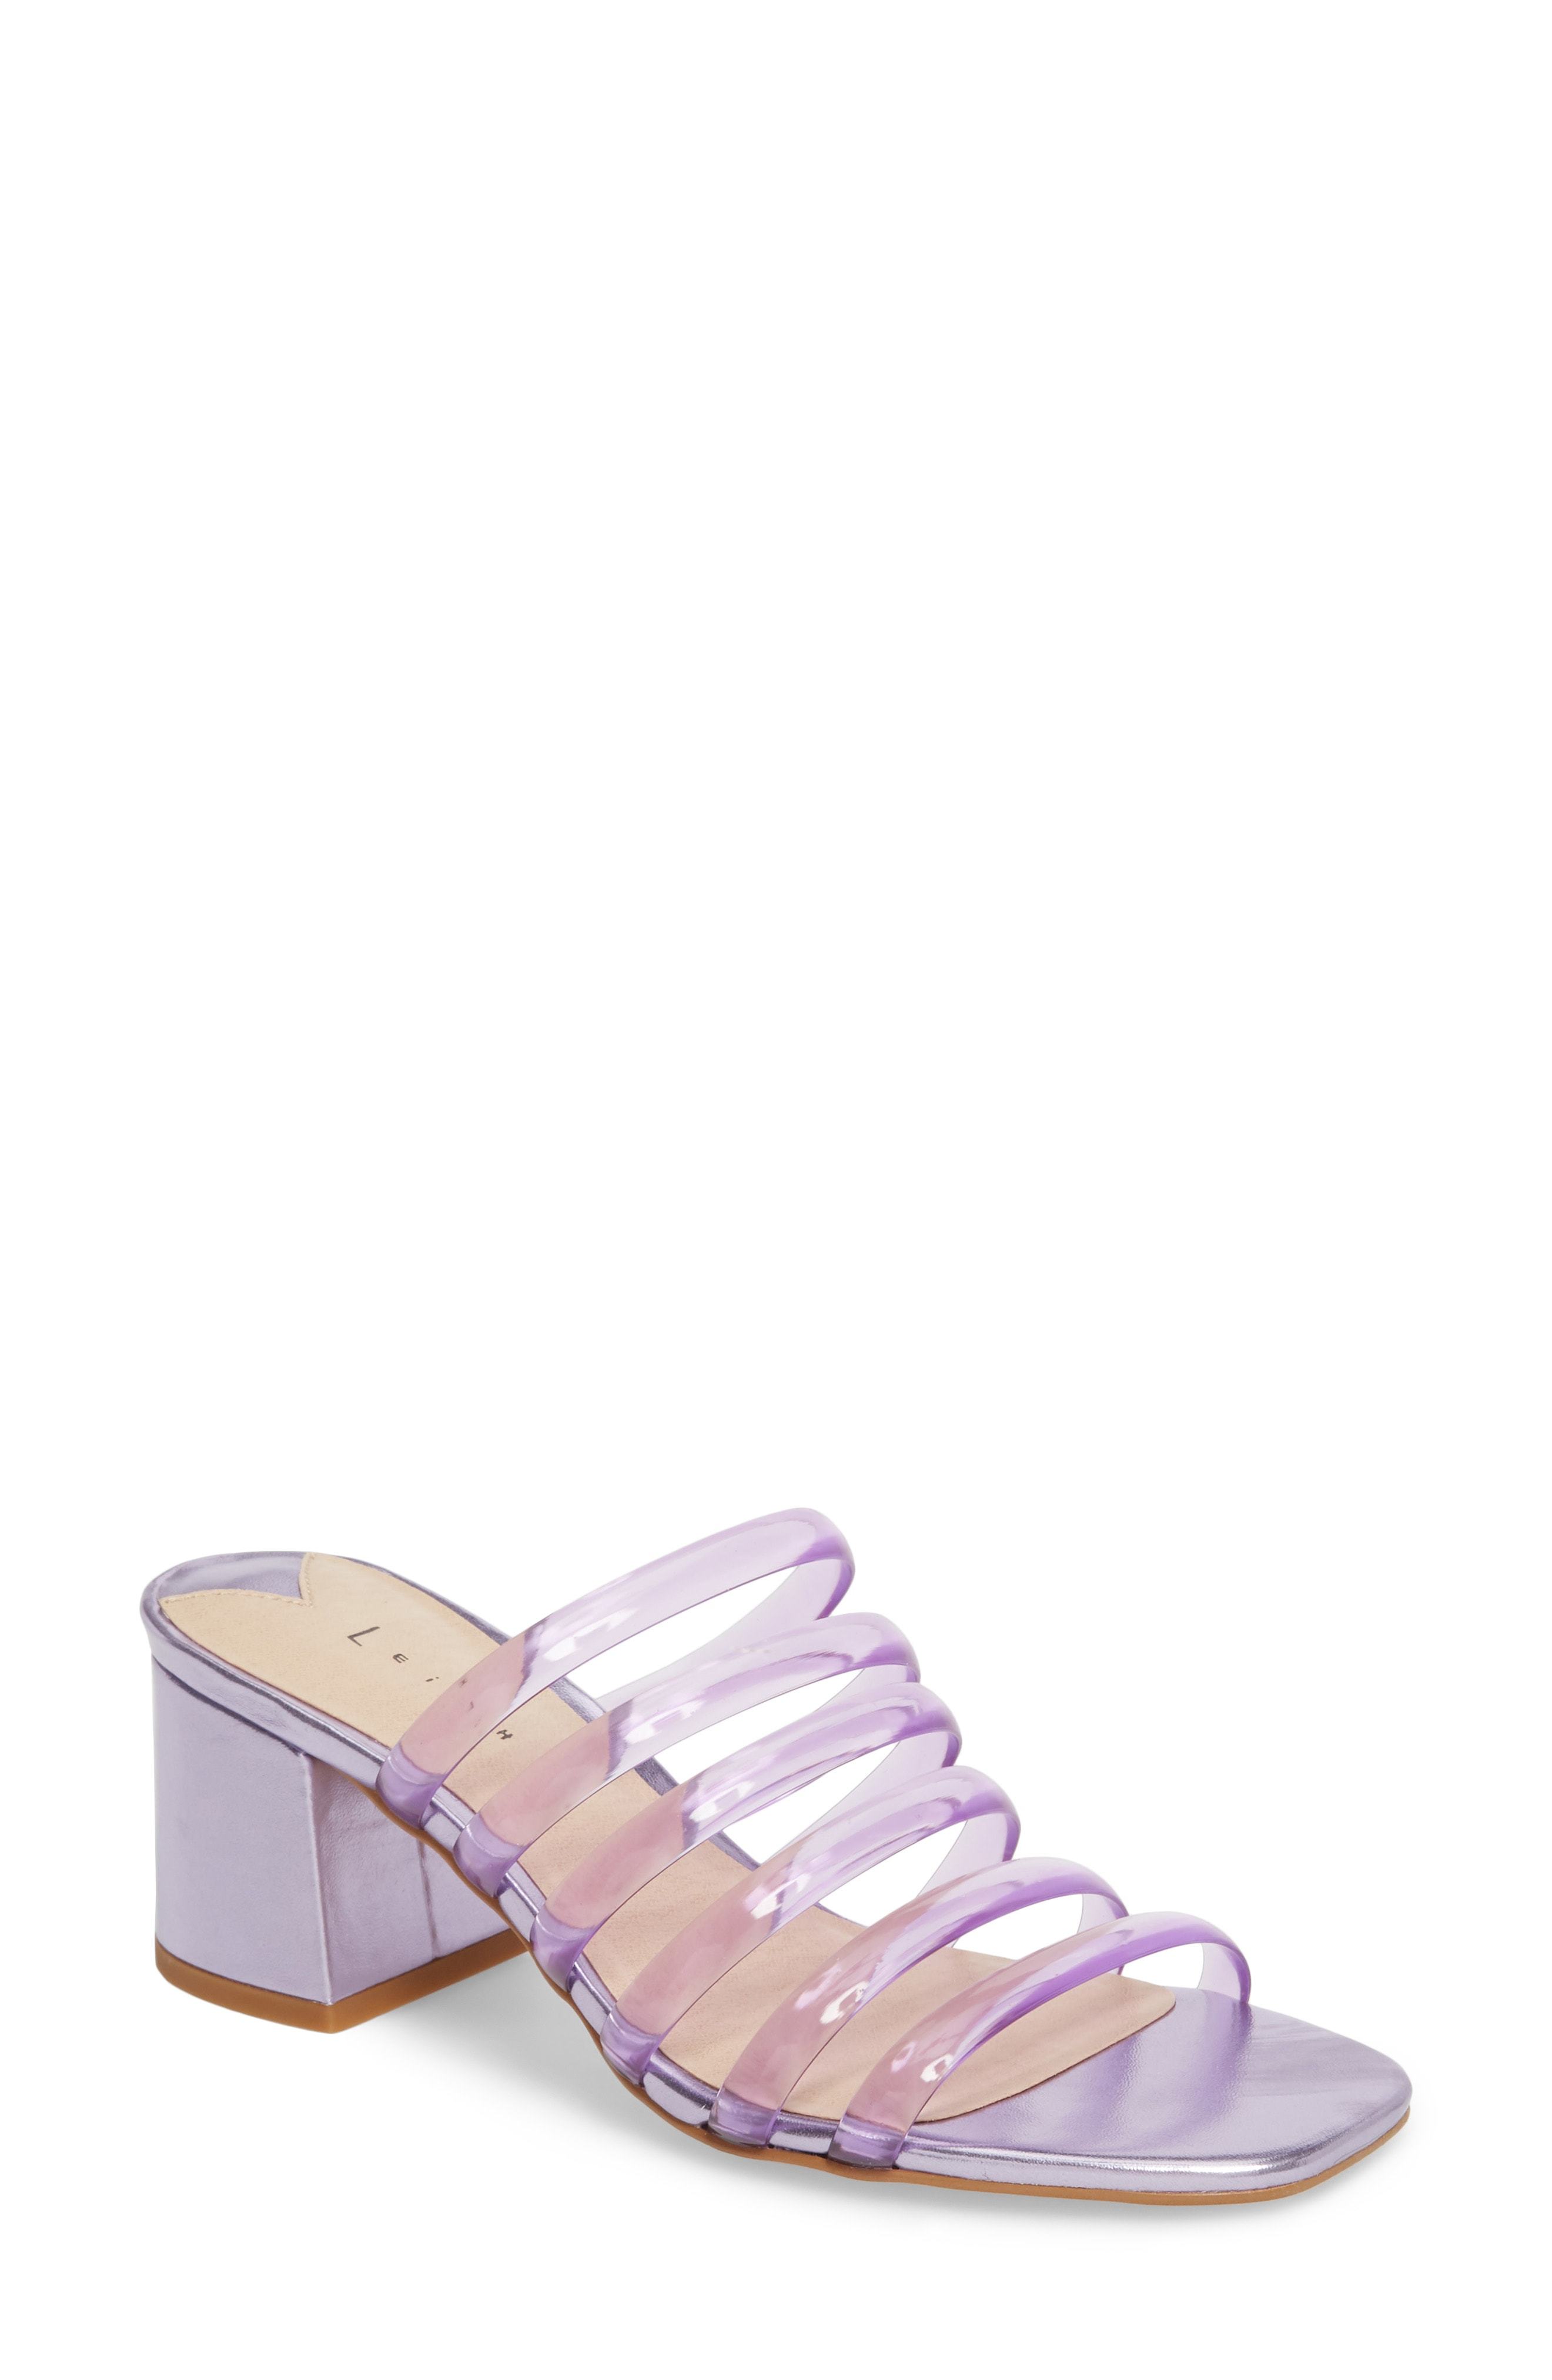 nordstrom jelly sandals